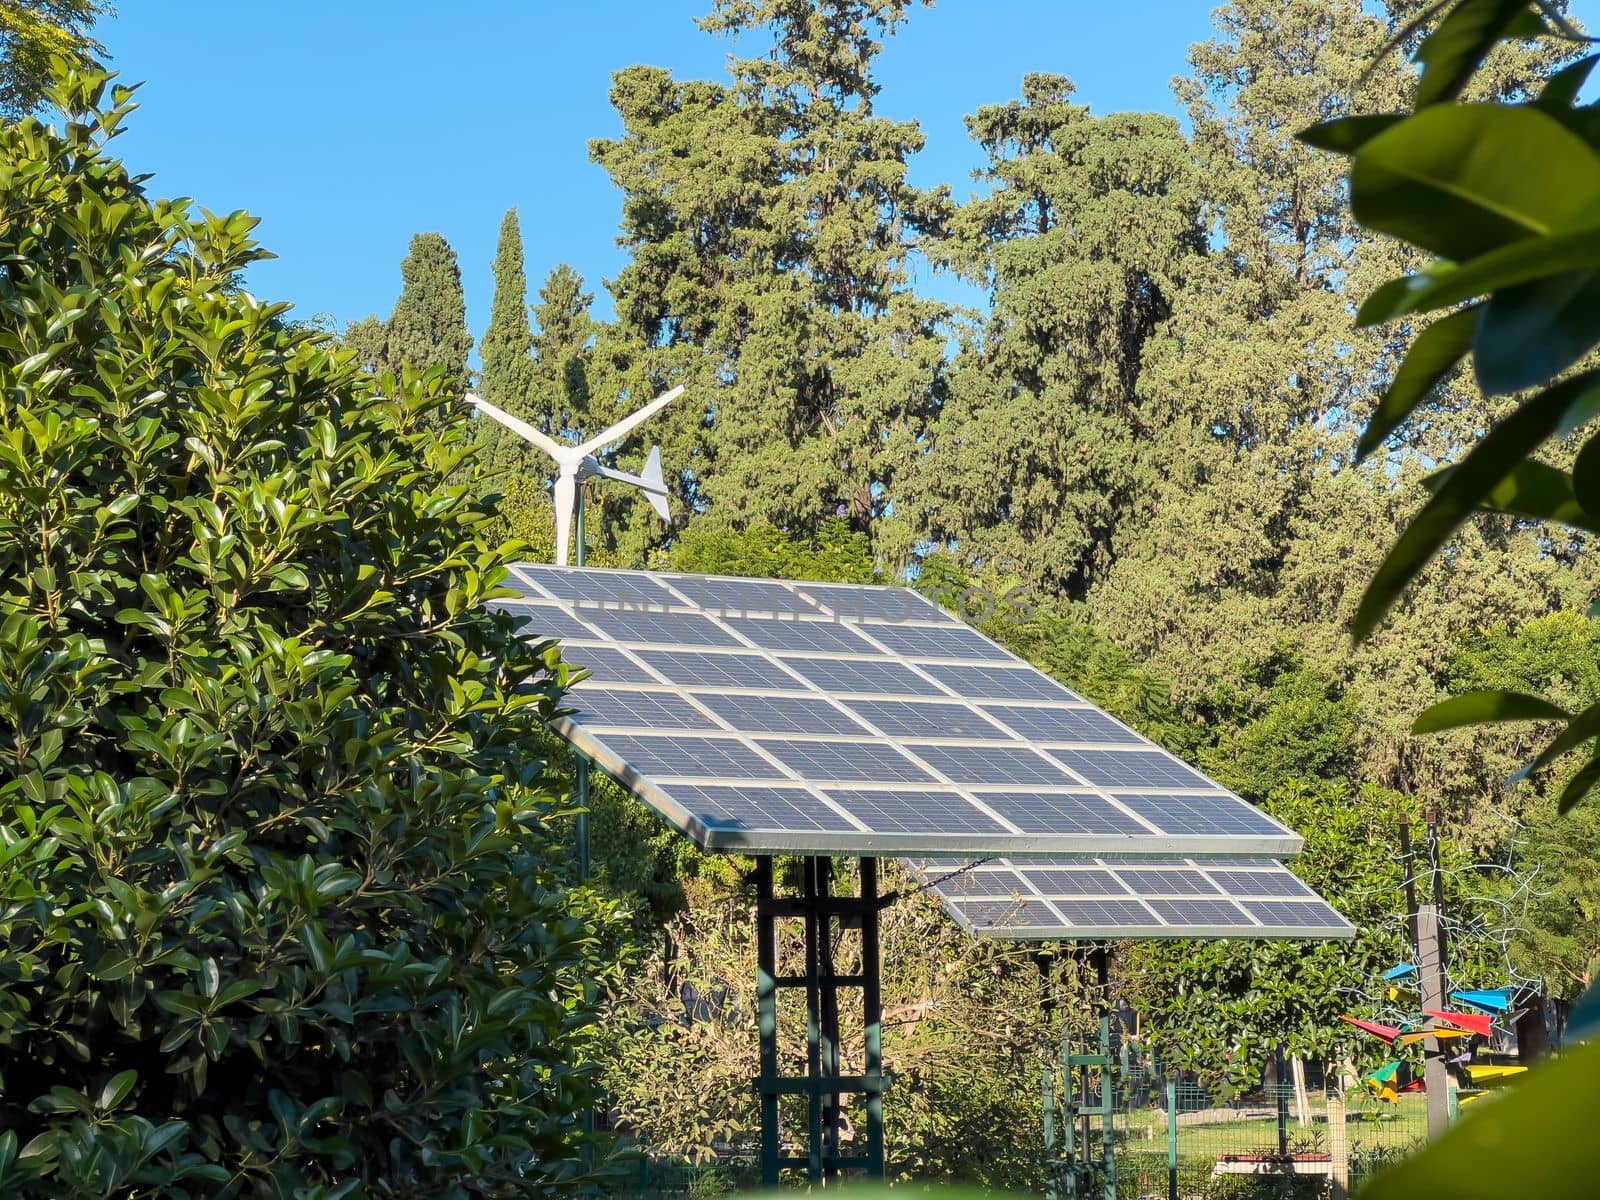 Wind turbine and solar panel installed in the green park area